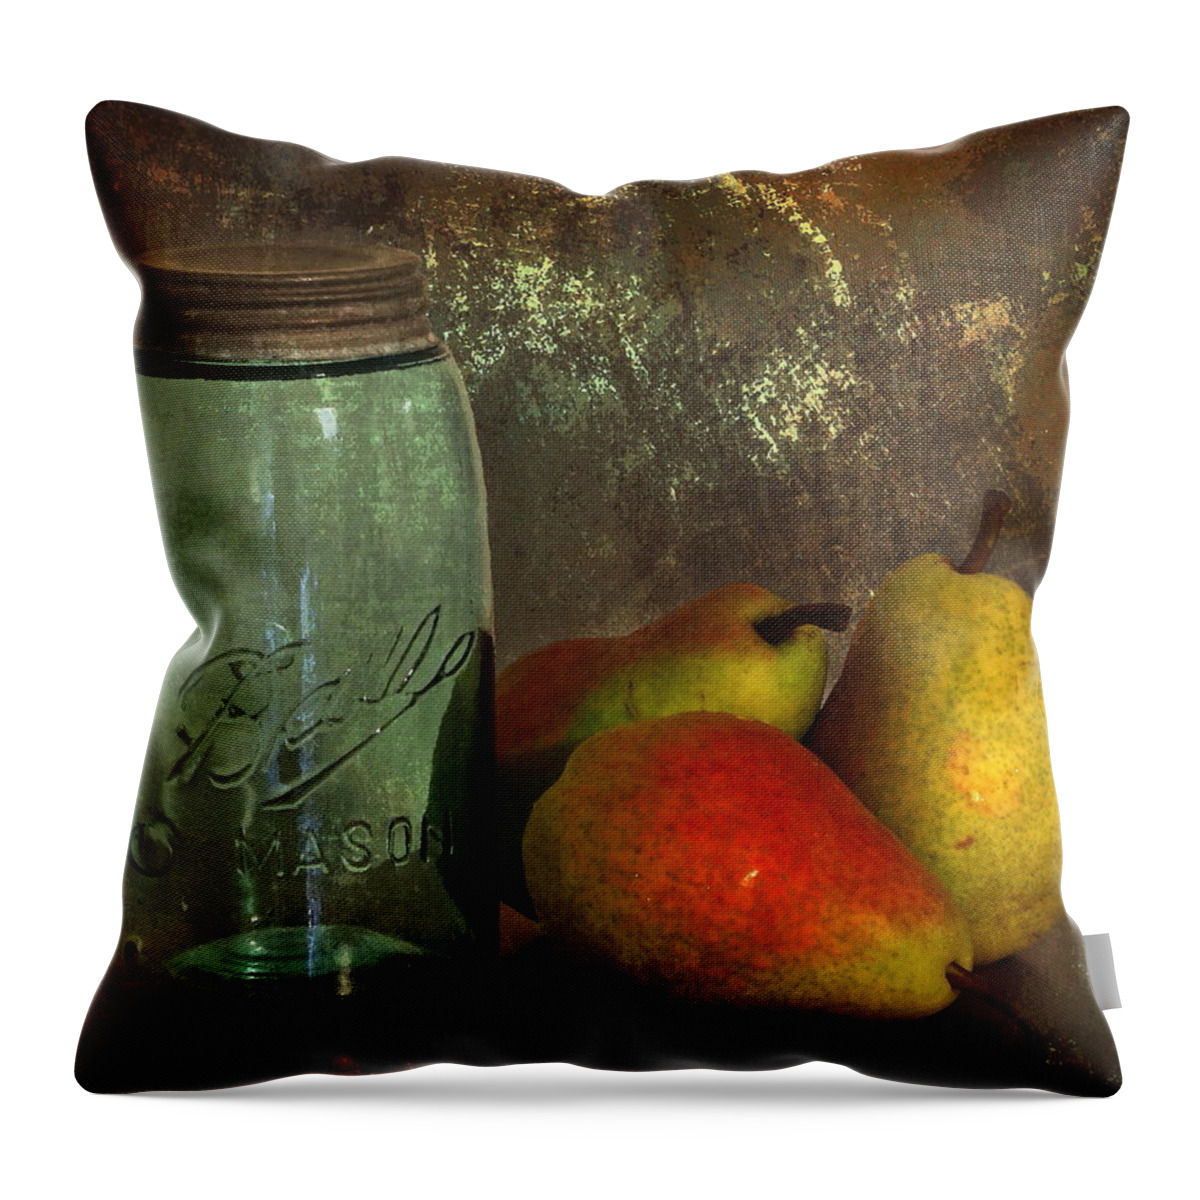 Canning Throw Pillow featuring the photograph Canning Season by Angie Vogel